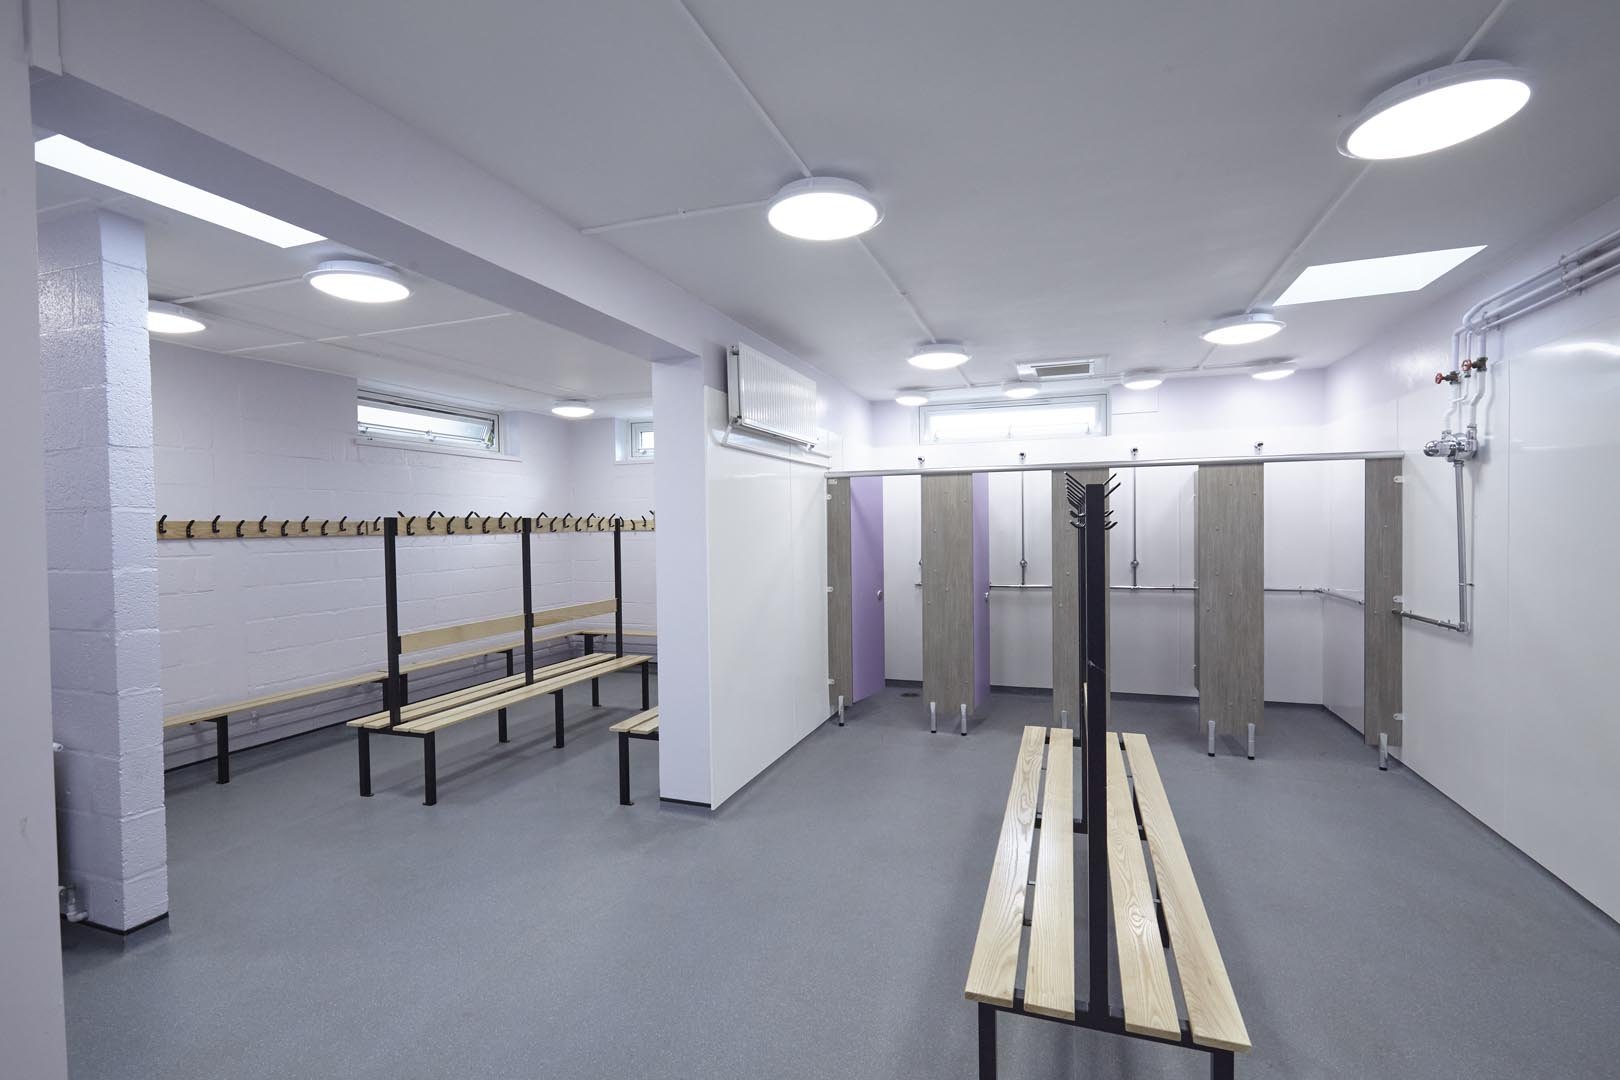 changing room with shower cubicles and benching at churchmead school.jpg